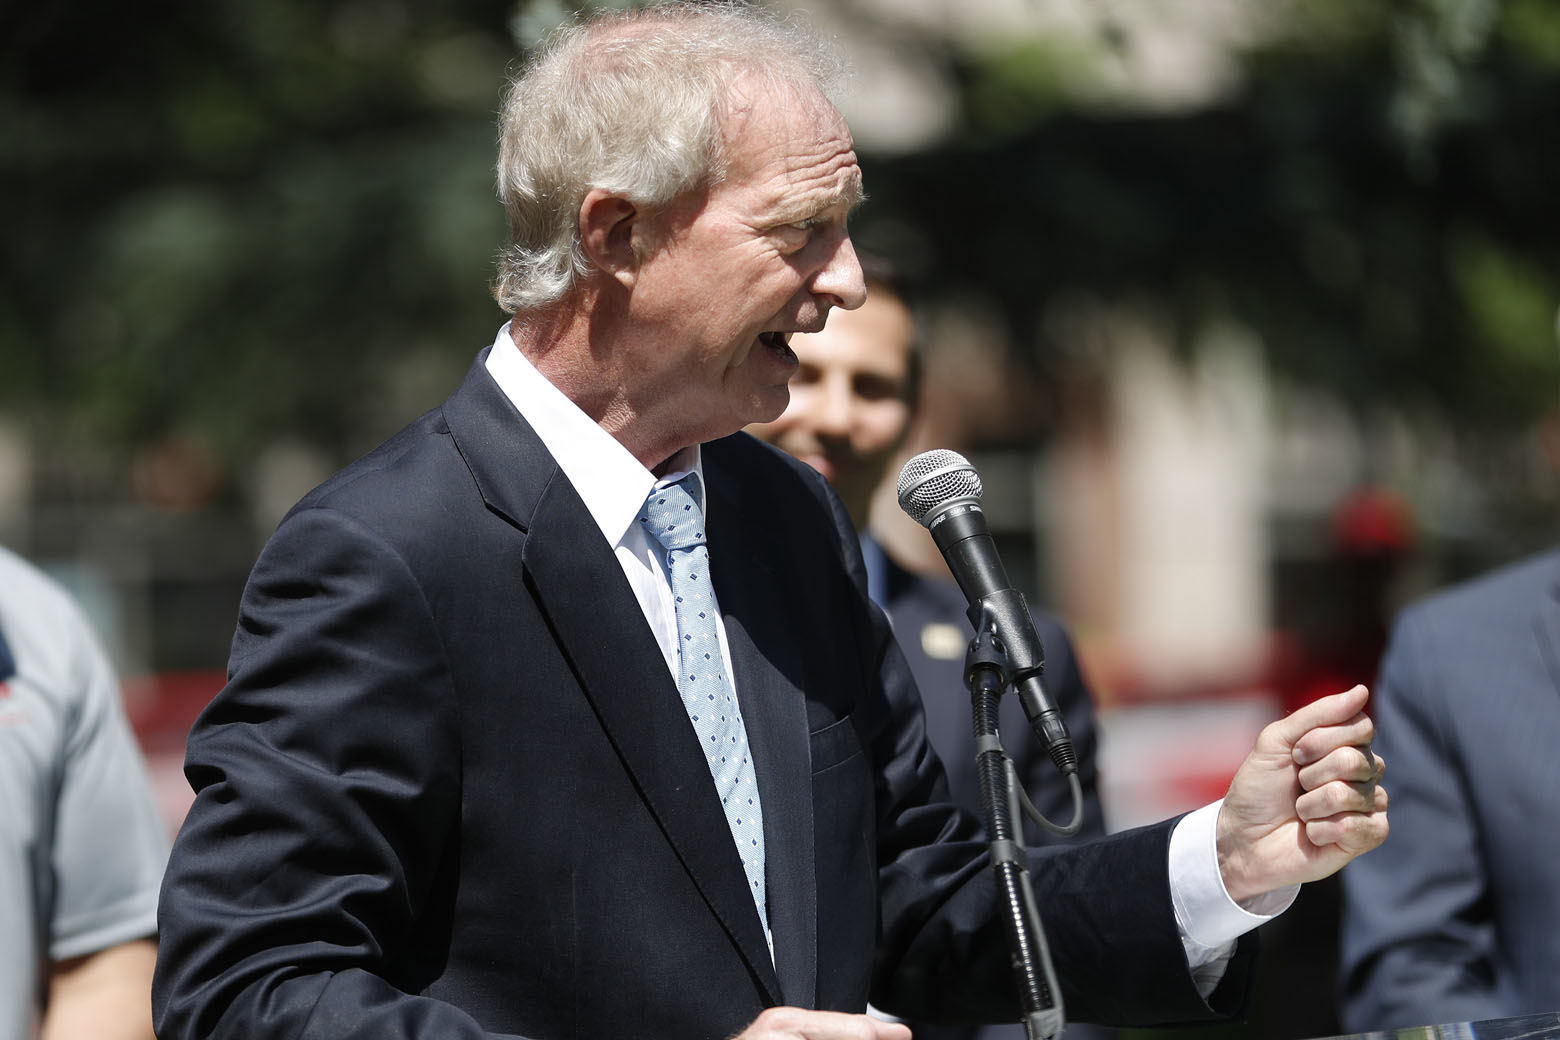 <h2>Insider on the outs</h2>
<p>Longtime D.C. Council Jack Evans came under scrutiny in 2019 over allegations of ethical misconduct.</p>
<p>The headlines, alone, tell part of the story:</p>
<ul>
<li><a href="https://wtop.com/dc/2019/03/dc-council-votes-to-reprimand-jack-evans/" target="_blank" rel="noopener">DC Council votes to reprimand Jack Evans</a></li>
<li><a href="https://wtop.com/dc/2019/06/jack-evans-resigning-from-metro-board-after-ethics-violation/" target="_blank" rel="noopener">Jack Evans to resign from Metro Board after ethics violation</a></li>
<li><a href="https://wtop.com/dc/2019/06/feds-search-georgetown-home-of-dc-councilman-jack-evans/slide/1/" target="_blank" rel="noopener">FBI searches Georgetown home of DC Councilman Jack Evans</a></li>
<li><a href="https://wtop.com/dc/2019/08/jack-evans-fines-20000-in-ethics-board-probe/" target="_blank" rel="noopener">Embattled DC council member Jack Evans fined $20K in ethics probe</a></li>
</ul>
<p>The series of spiraling scandals — which include a federal investigation that has yet to be resolved — <a href="https://wtop.com/dc/2019/12/dc-council-approves-report-recommending-members-expulsion/" target="_blank" rel="noopener">culminated in a vote this month</a> by the D.C. Council to move forward with the unprecedented step of expelling Evans. Many of his colleagues on the council urged Evans to resign. For his part, Evans maintains his innocence, and his lawyers have said the allegations against him are &#8220;nowhere near as serious&#8221; as his critics have charged.</p>
<p>In any case, the longest-serving member of the council gets a holiday reprieve. The final vote by the council that would force Evans off the council is tentatively set for Jan. 7.</p>
